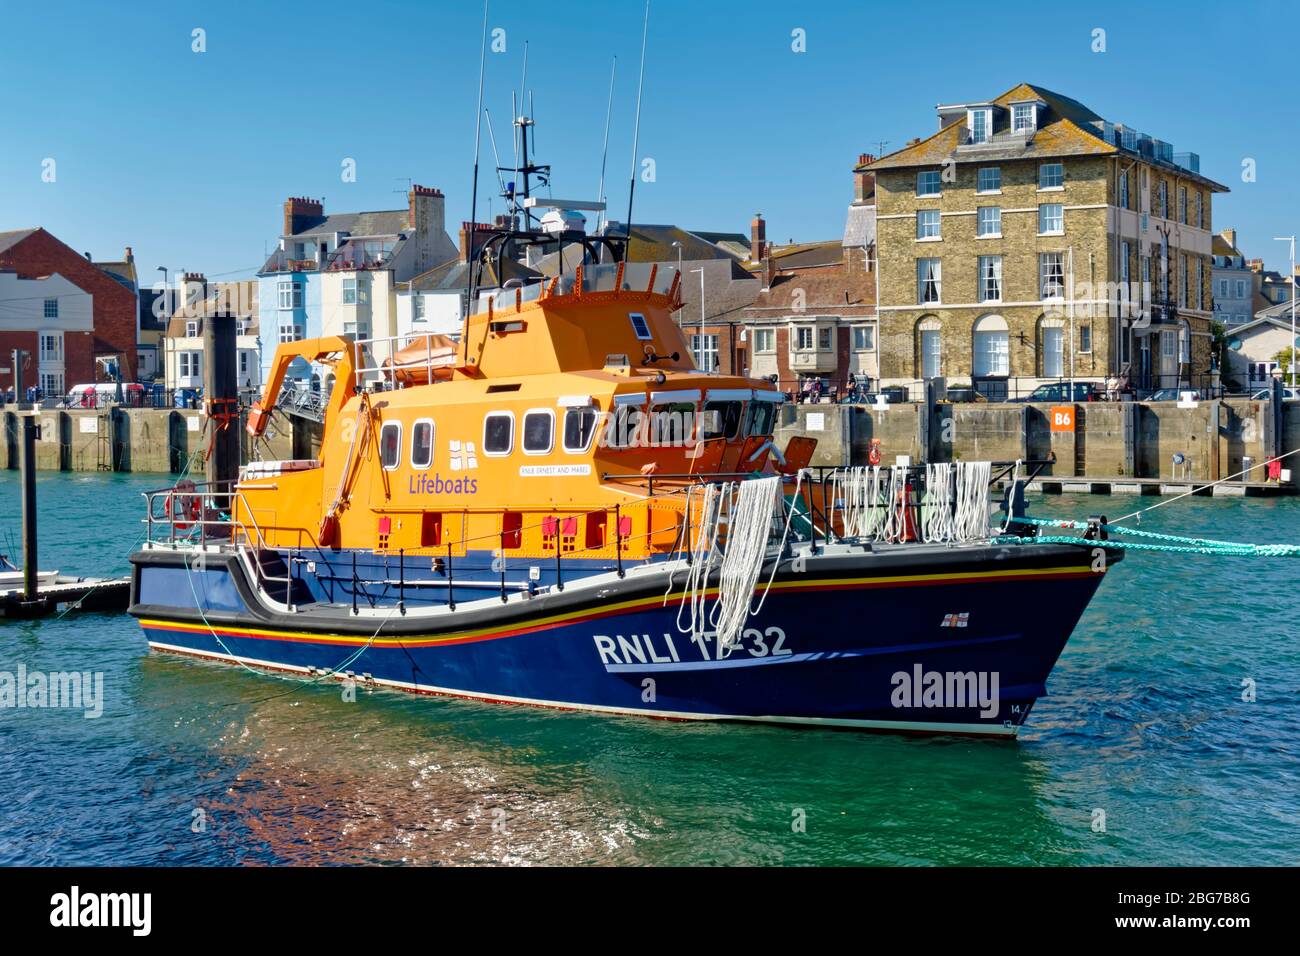 Weymouth, Dorset / UK - October 10 2018: Weymouth's Severn class RNLI Lifeboat 'Ernest and Mabel' No 17-32 moored in Weymouth Harbour Stock Photo